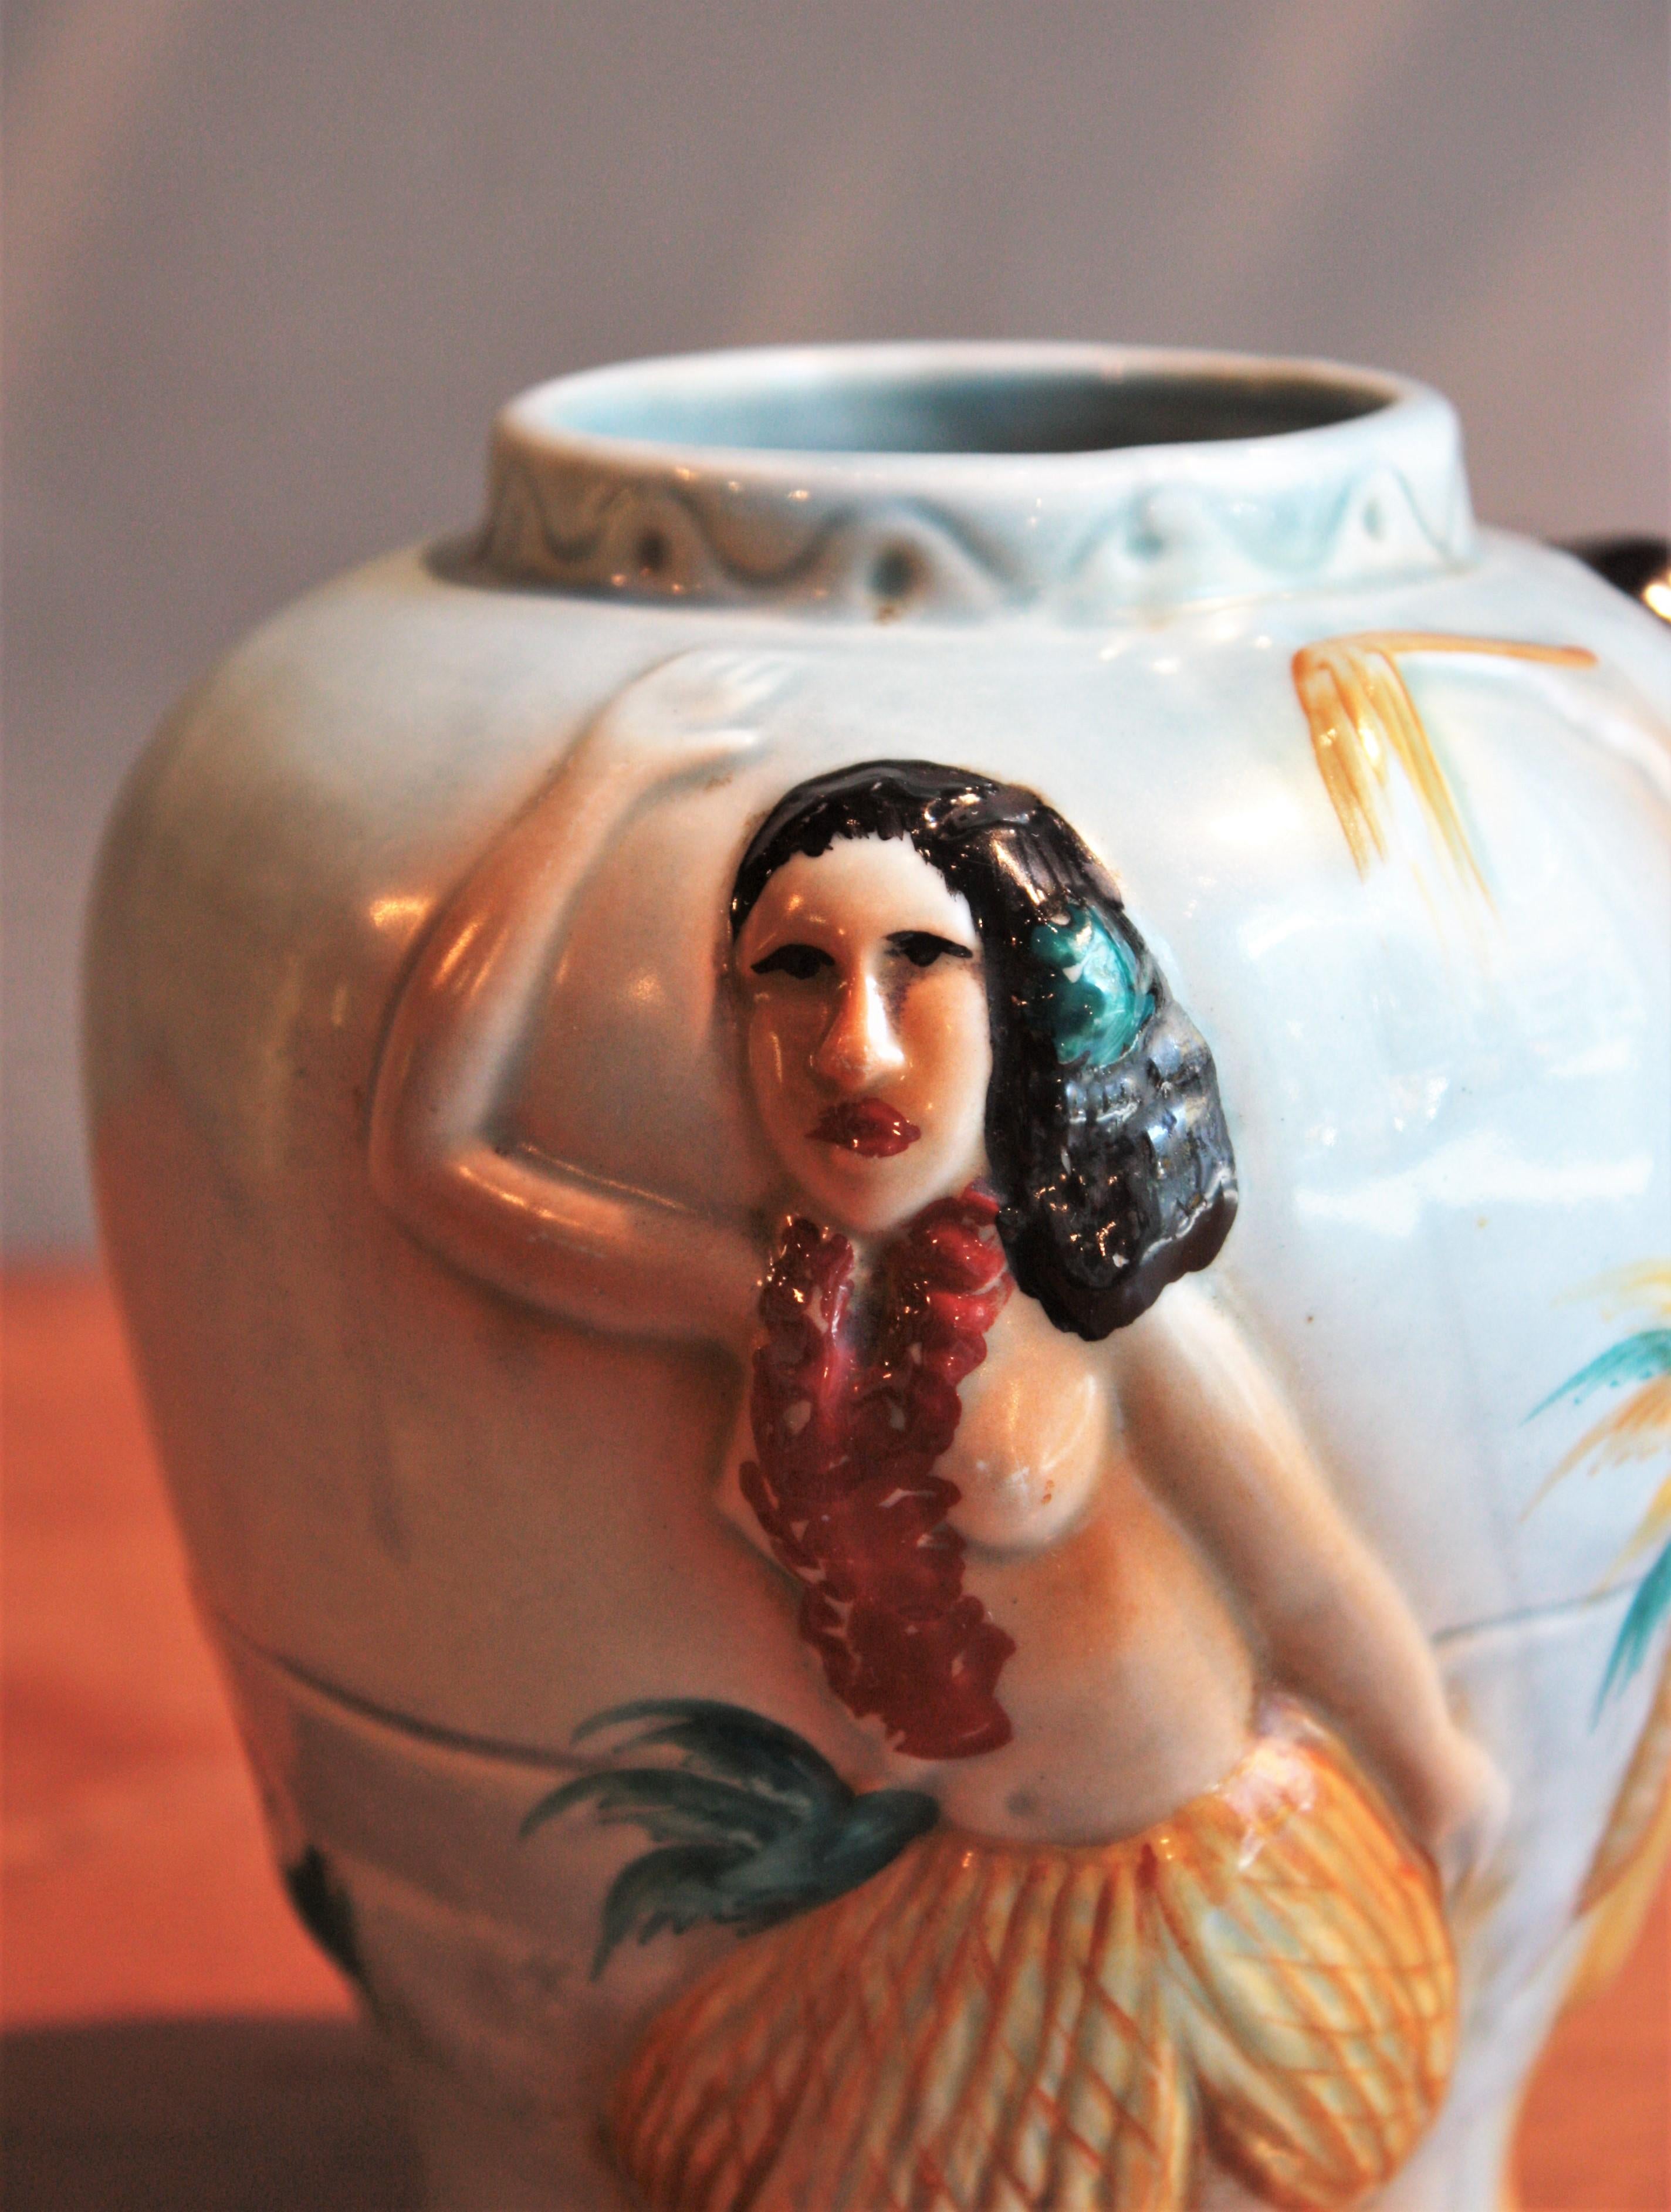 20th Century Midcentury Glazed Ceramic Vase with Hand-Painted Hula Dancers Motif For Sale